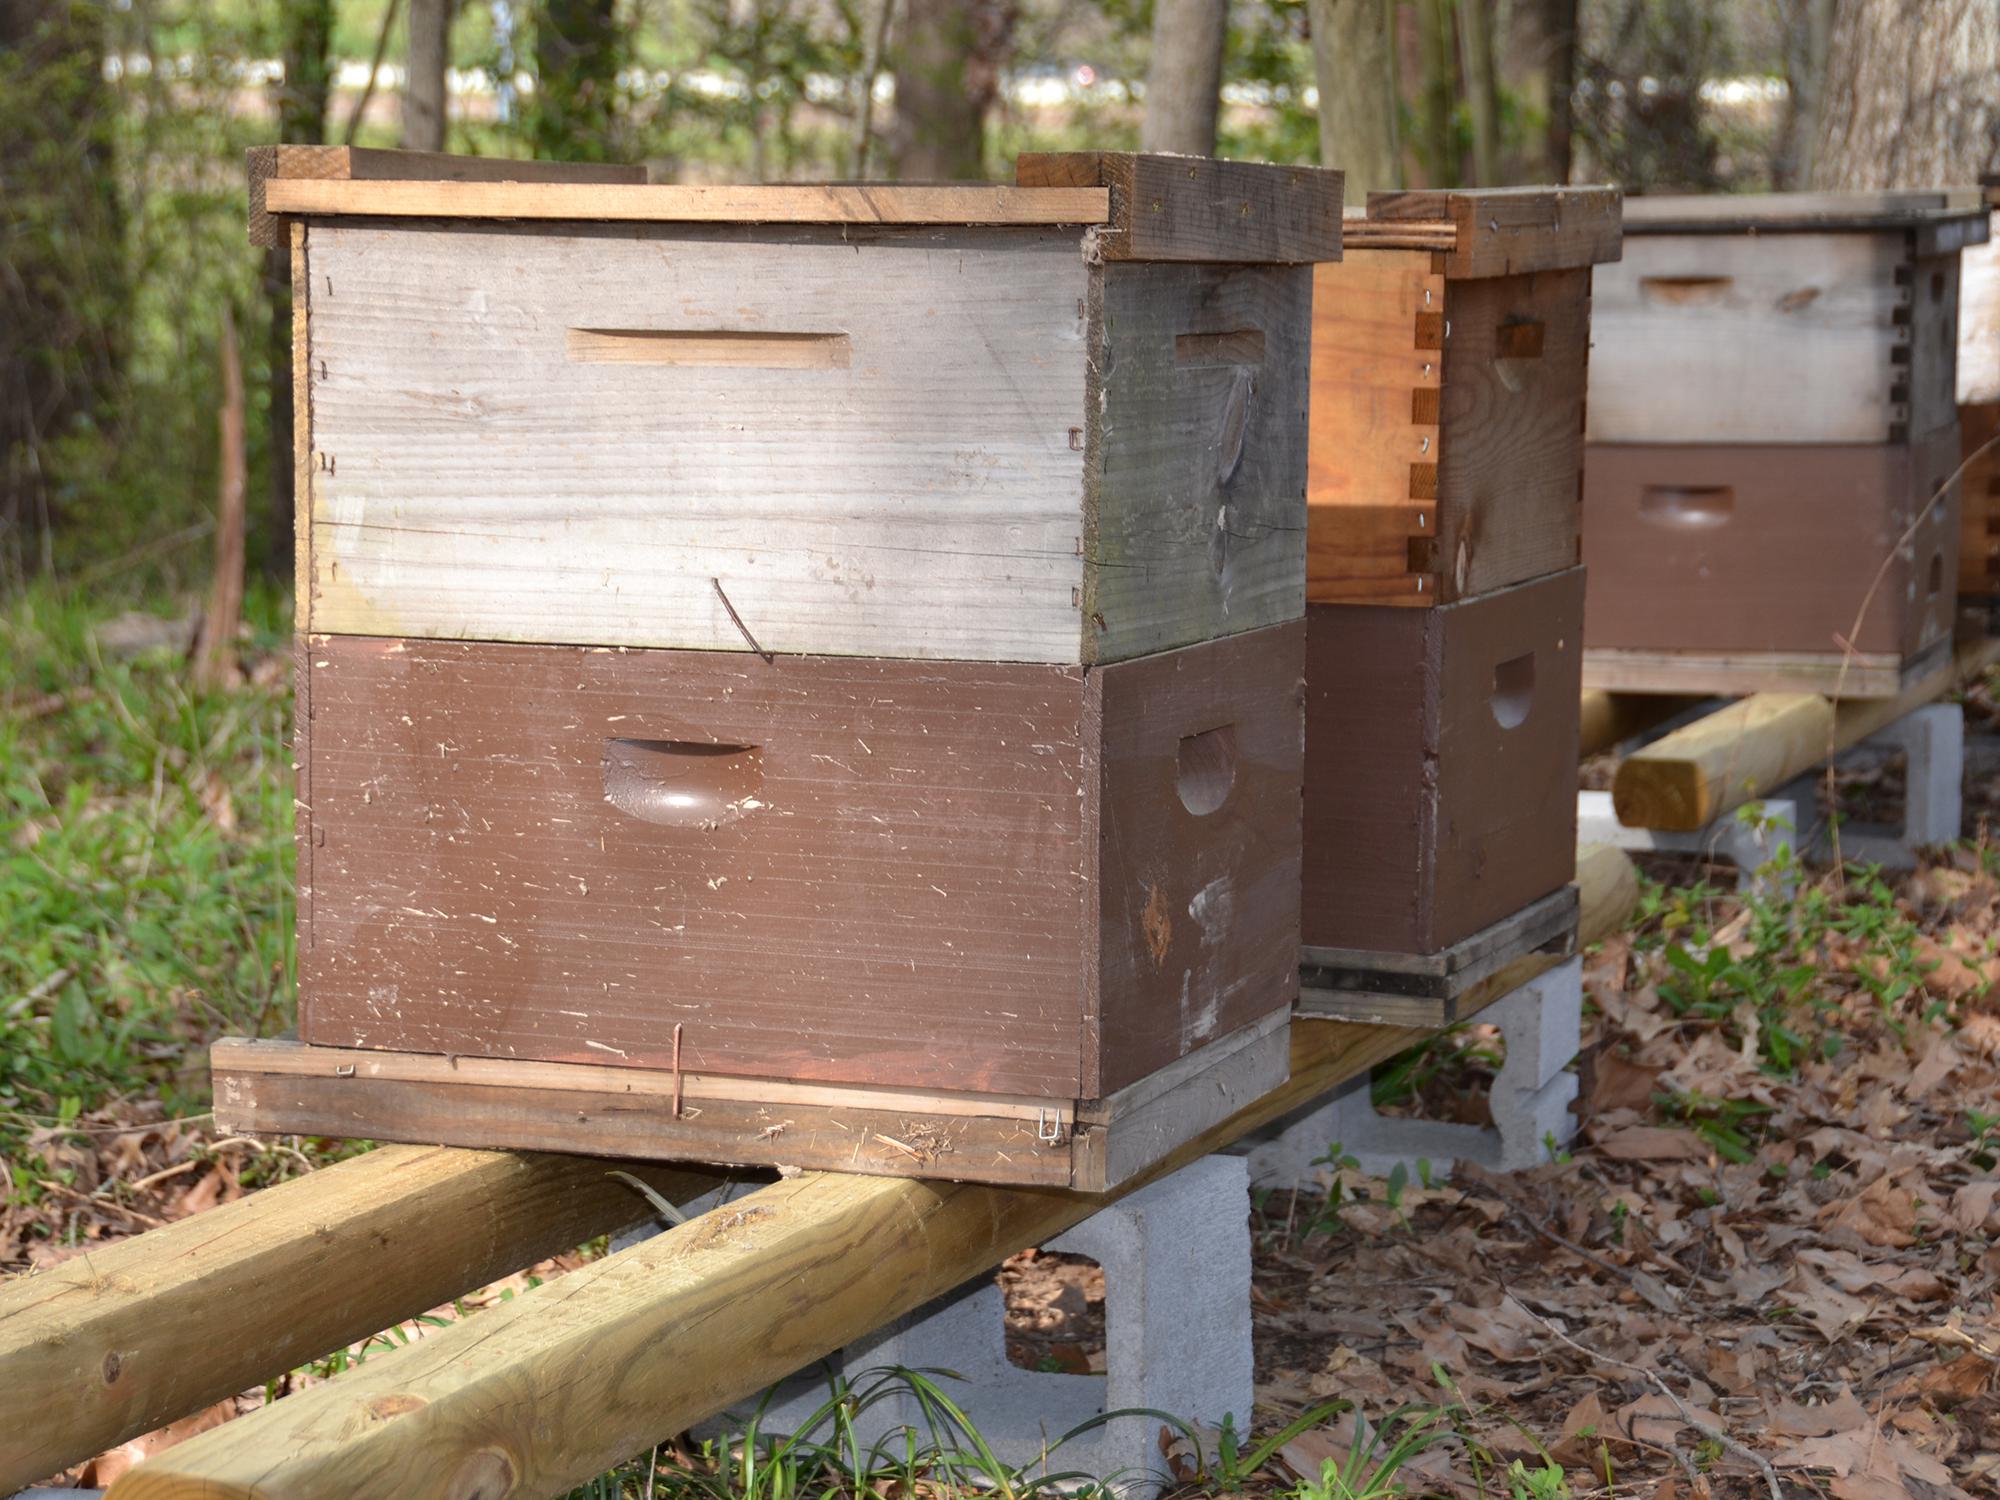 Several beehives were set up at the Mississippi Agriculture and Forestry Museum in Jackson, Mississippi, on March 16, 2016, for a hands-on, beginners beekeeping workshop planned for the weekend. The number of beekeepers in the state continues to rise. (Photo by MSU Extension Service/Susan Collins-Smith)